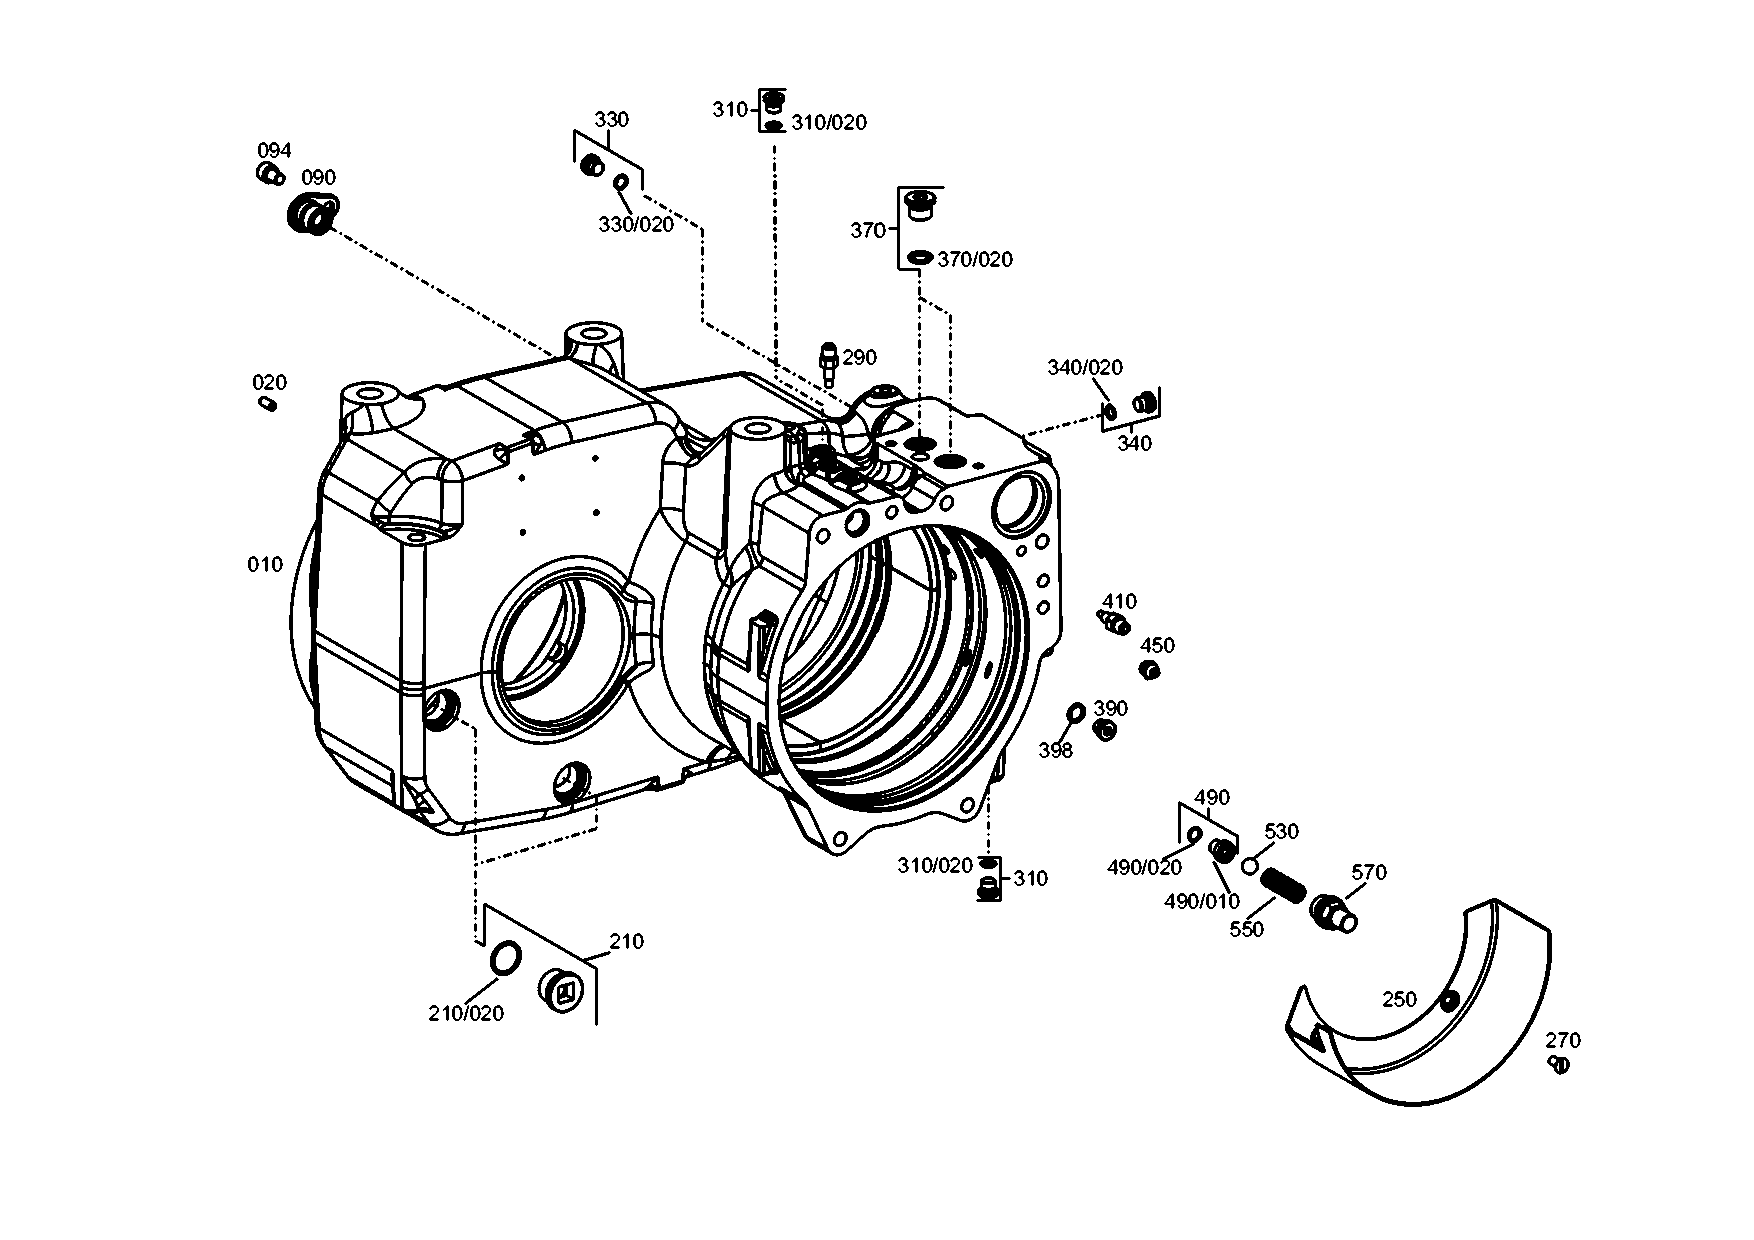 drawing for LIEBHERR GMBH 10219182 - COUNTERS.SCREW (figure 3)